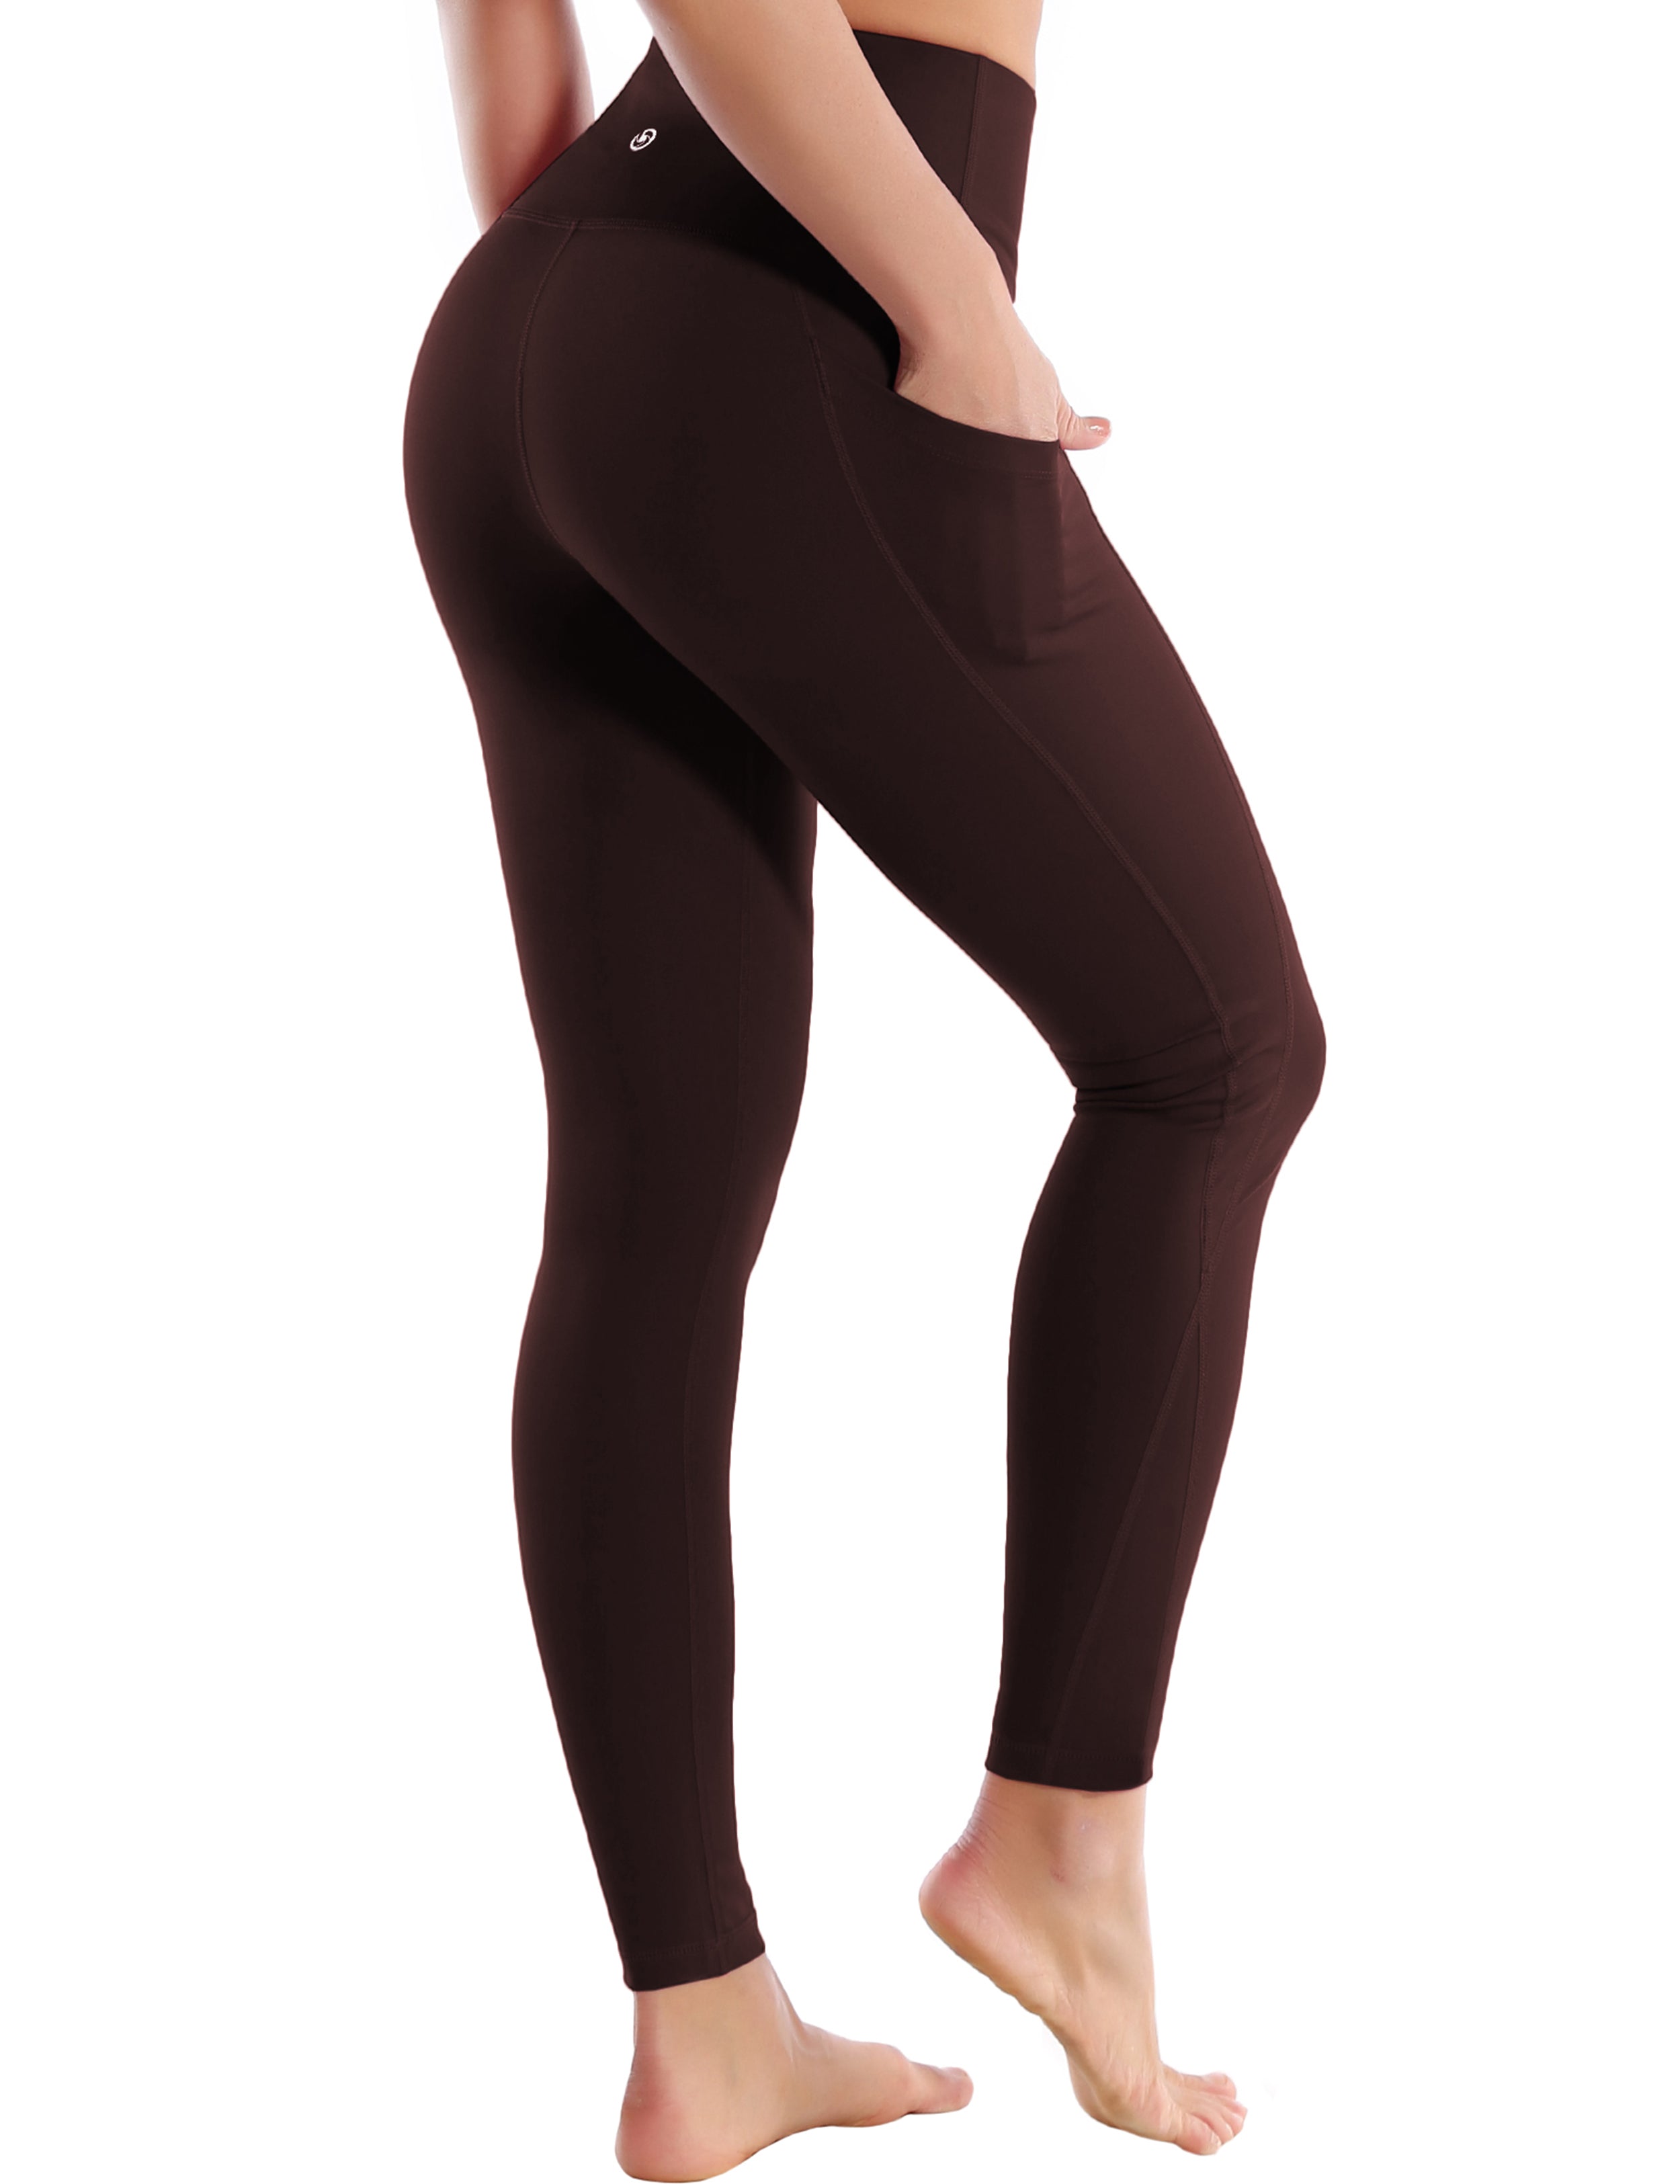 High Waist Side Pockets Jogging Pants mahoganymaroon 75% Nylon, 25% Spandex Fabric doesn't attract lint easily 4-way stretch No see-through Moisture-wicking Tummy control Inner pocket